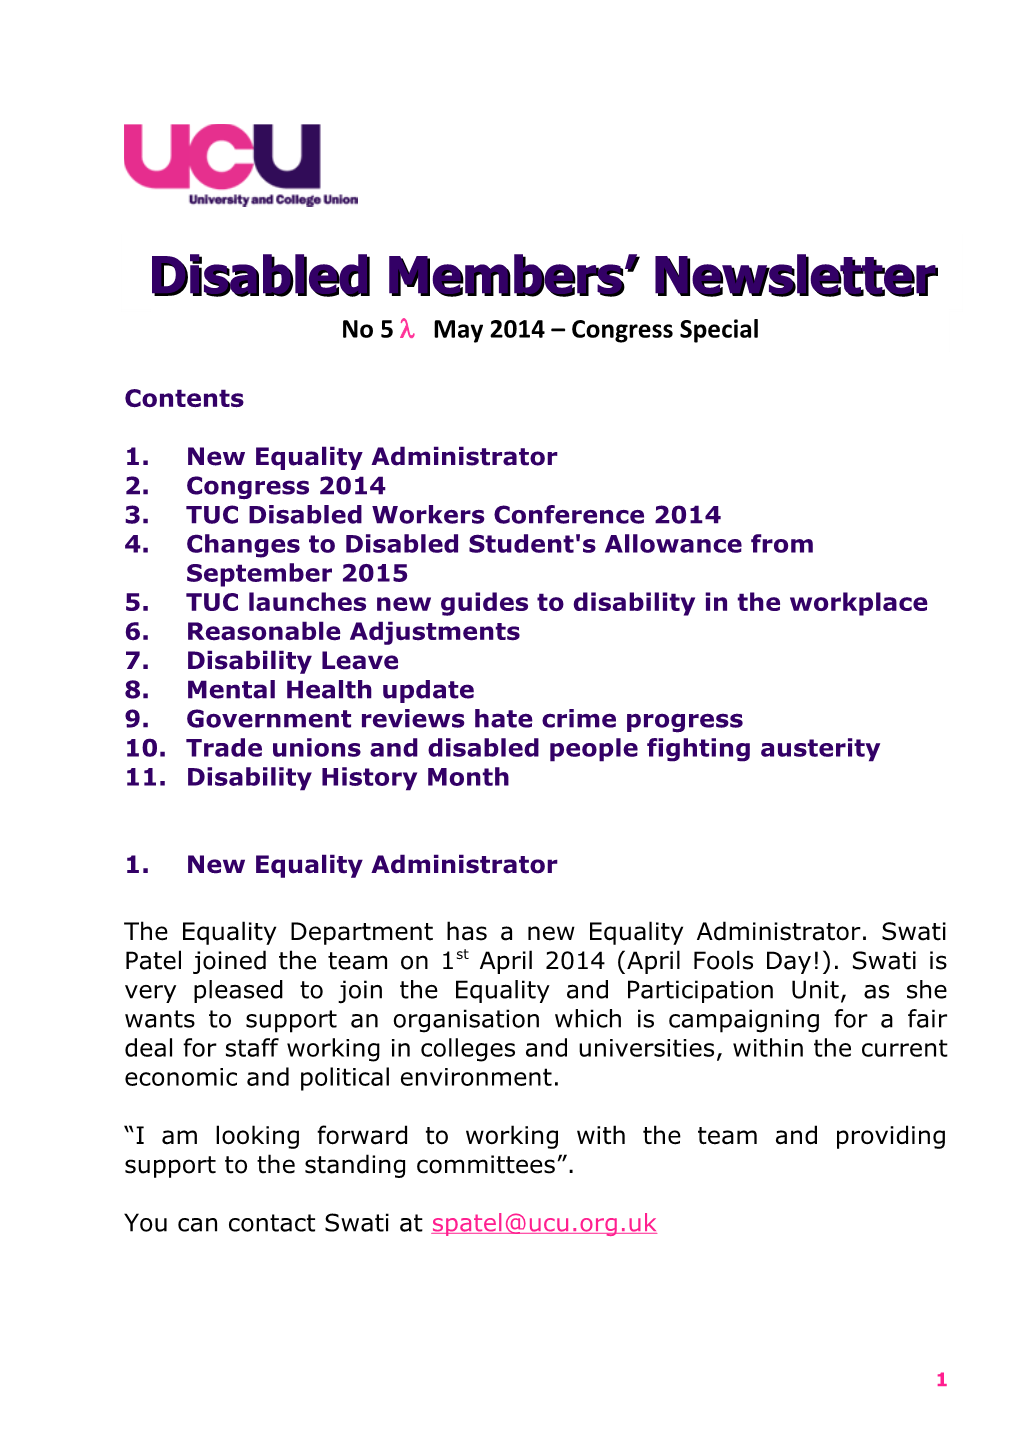 3.TUC Disabled Workers Conference 2014